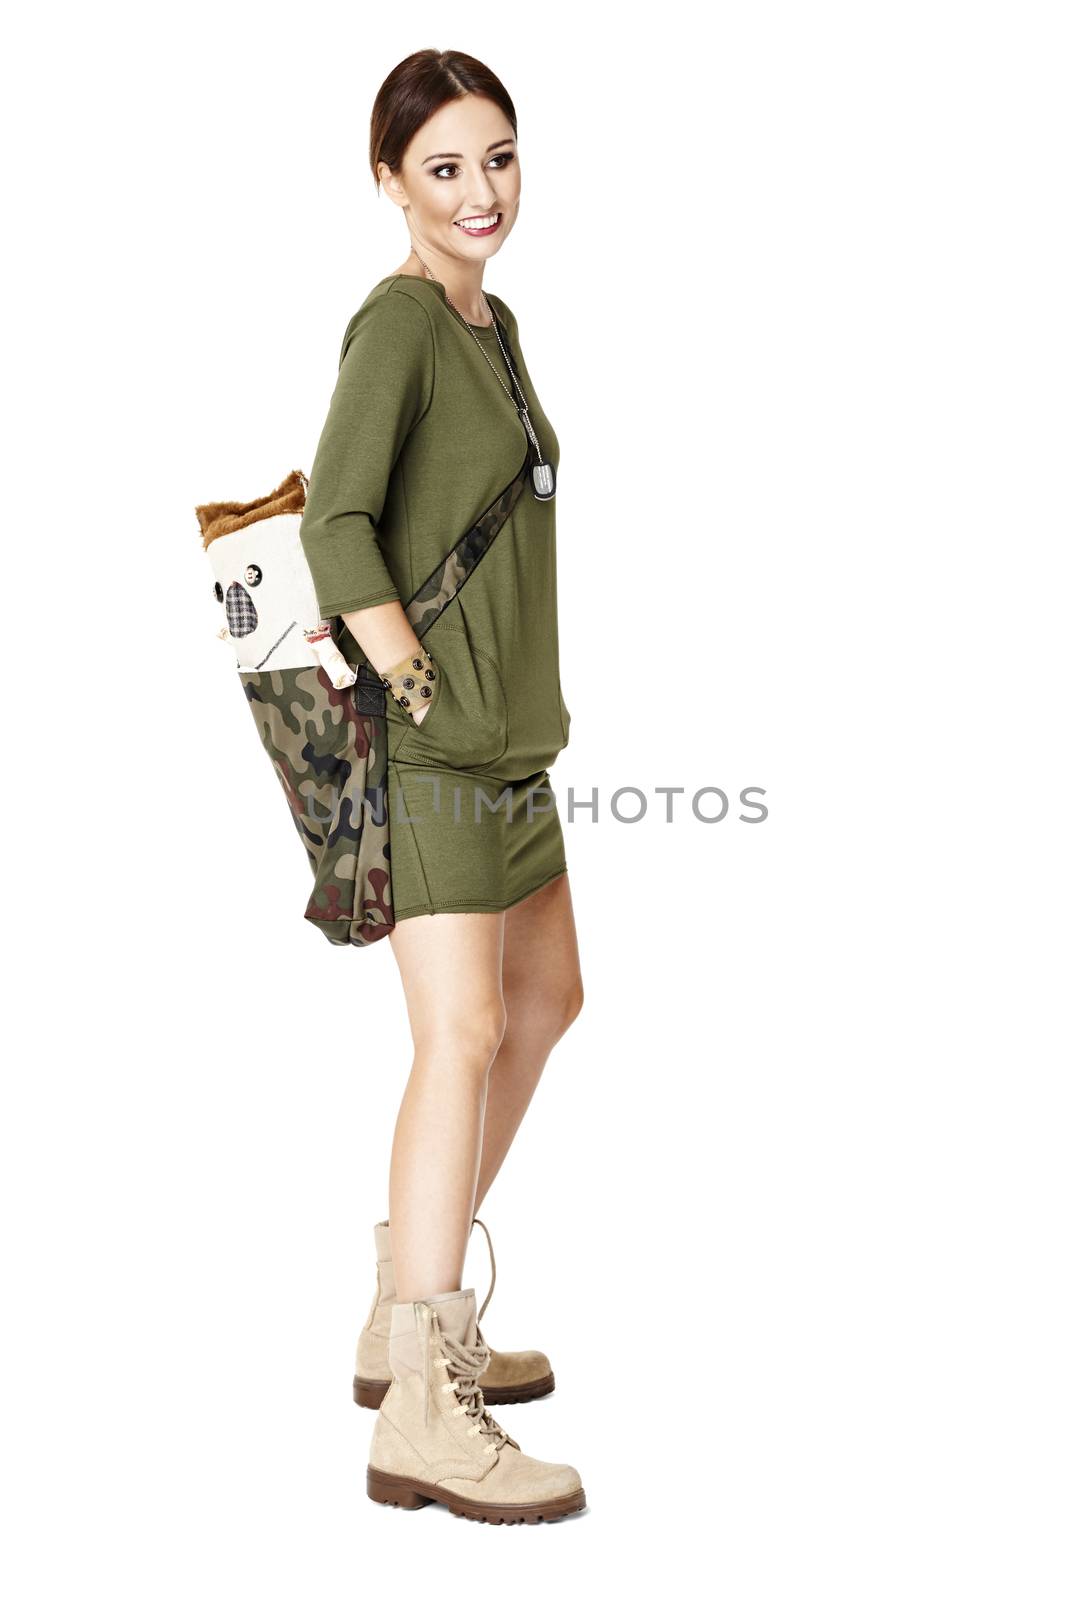 Studio shot of young woman with bag. Isolated one white background. 